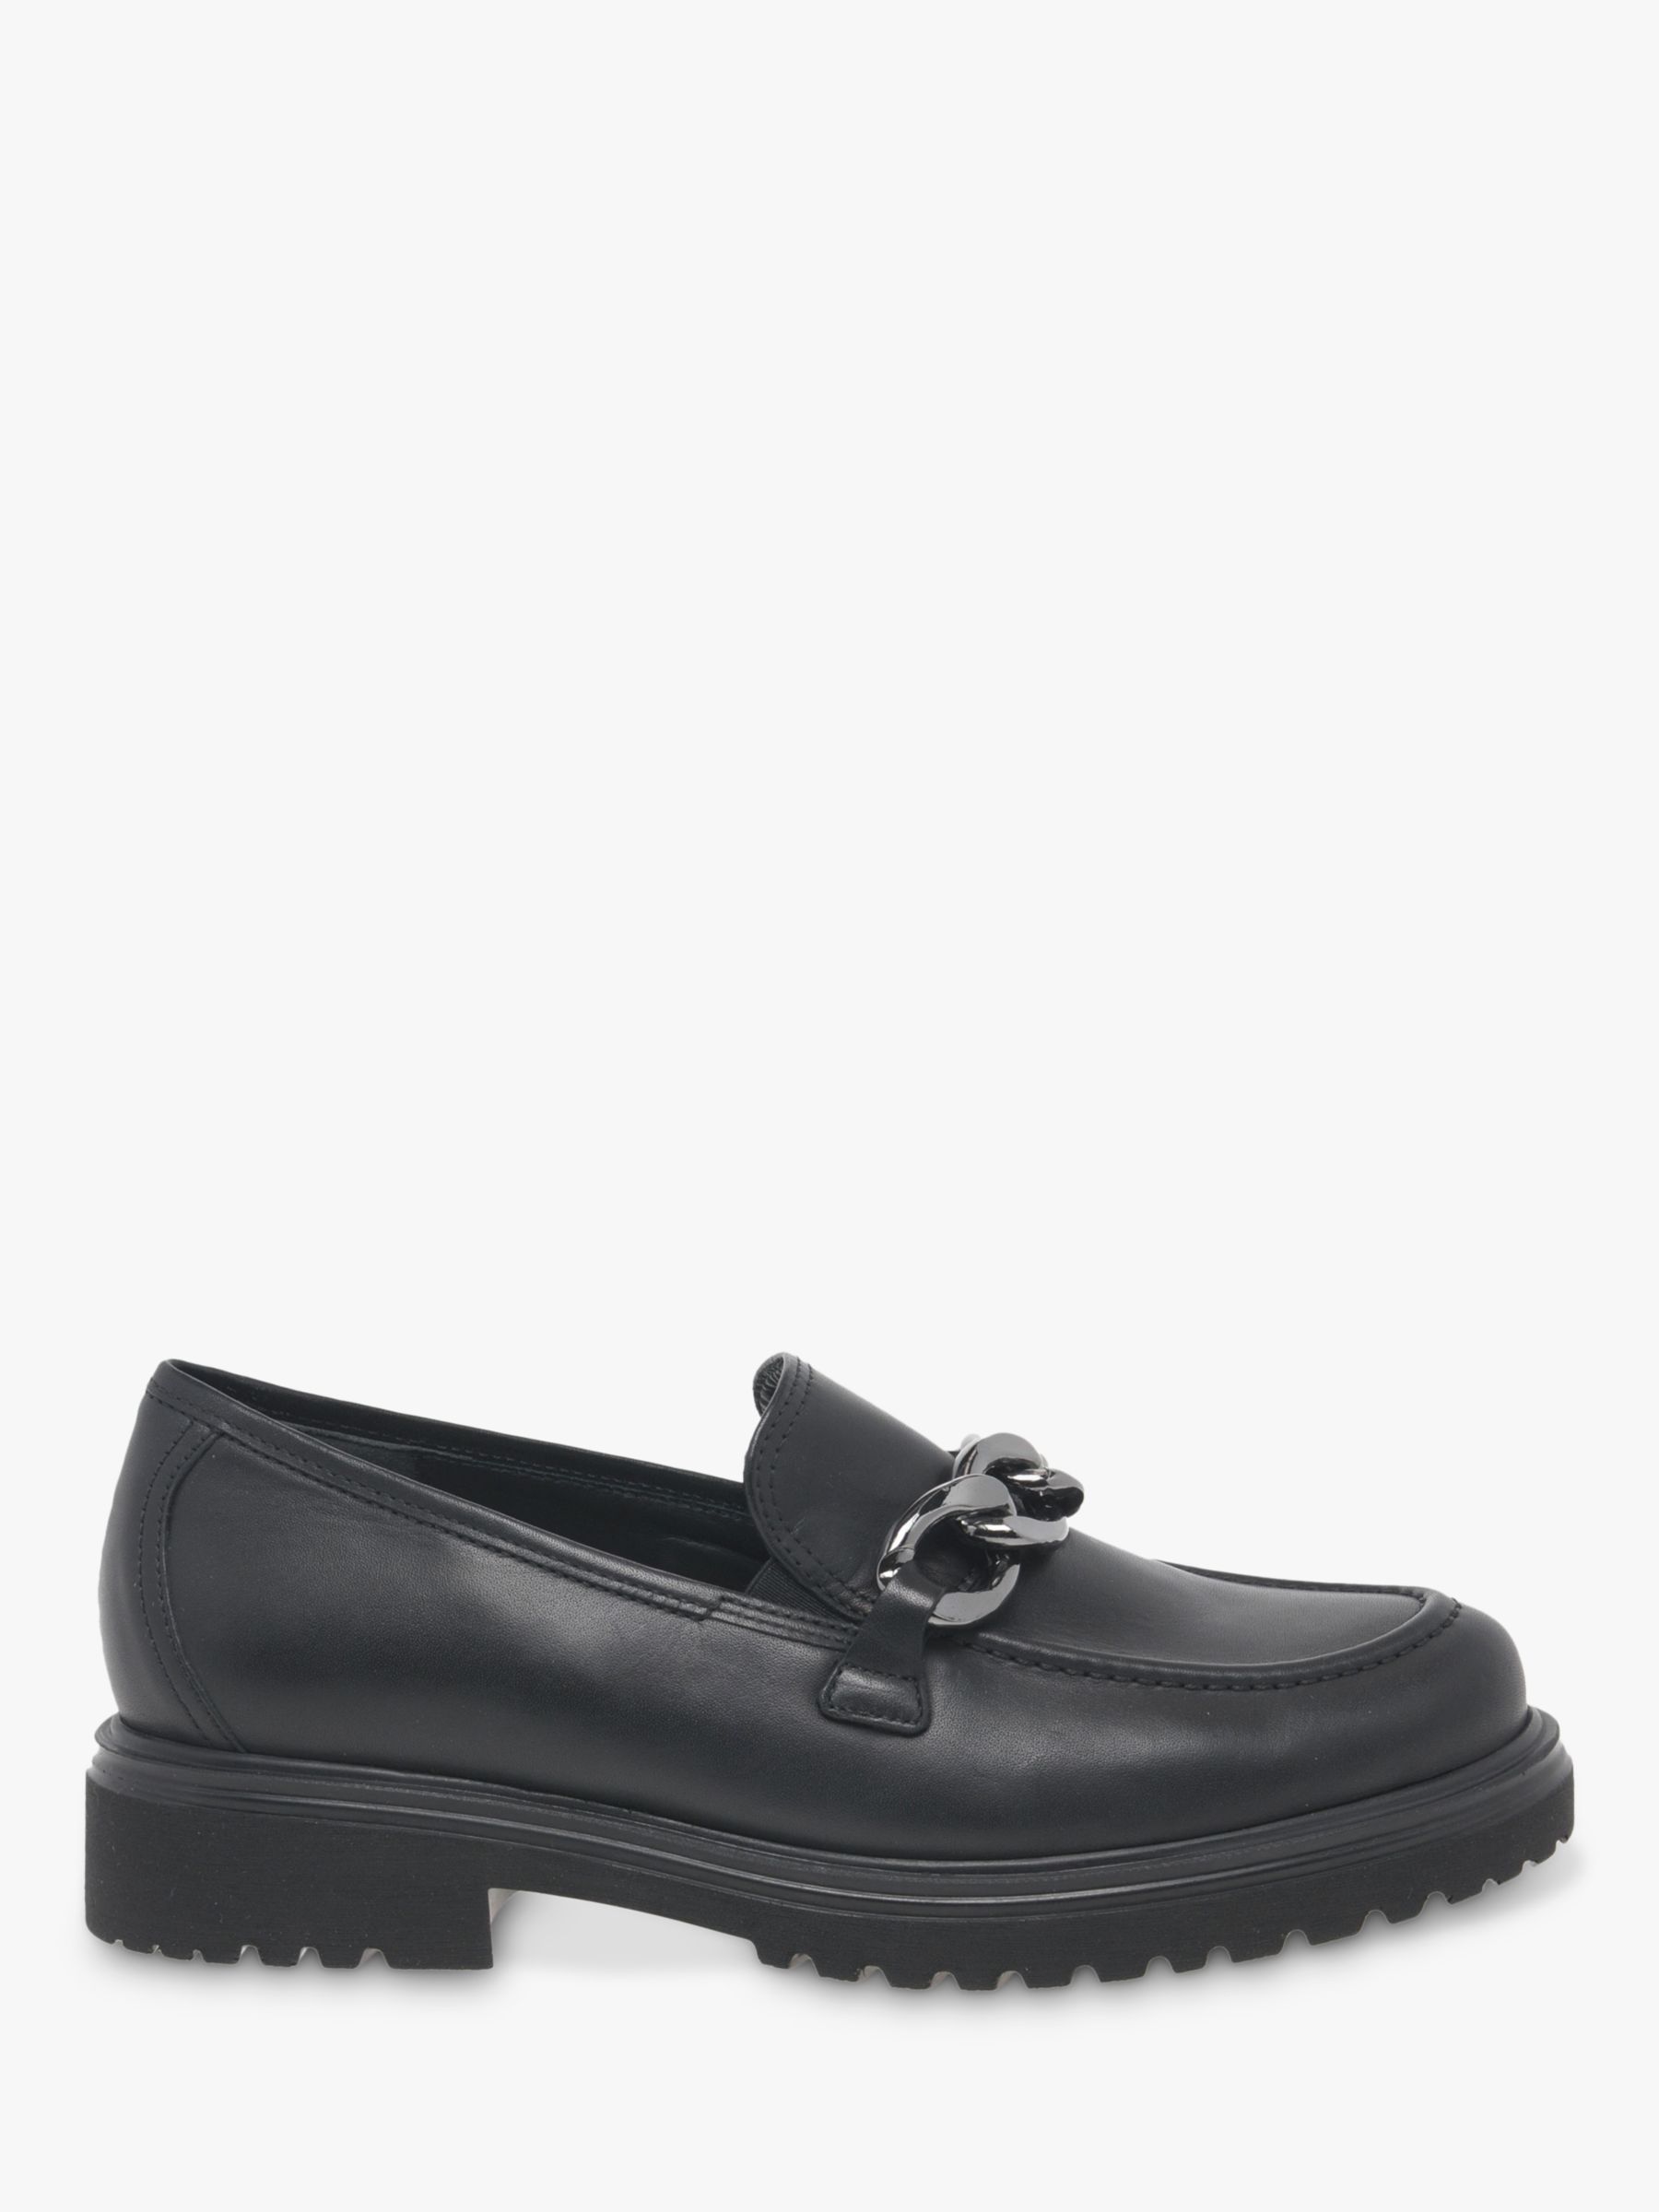 Gabor Florida Wide Fit Leather Loafers, Black at John Lewis & Partners